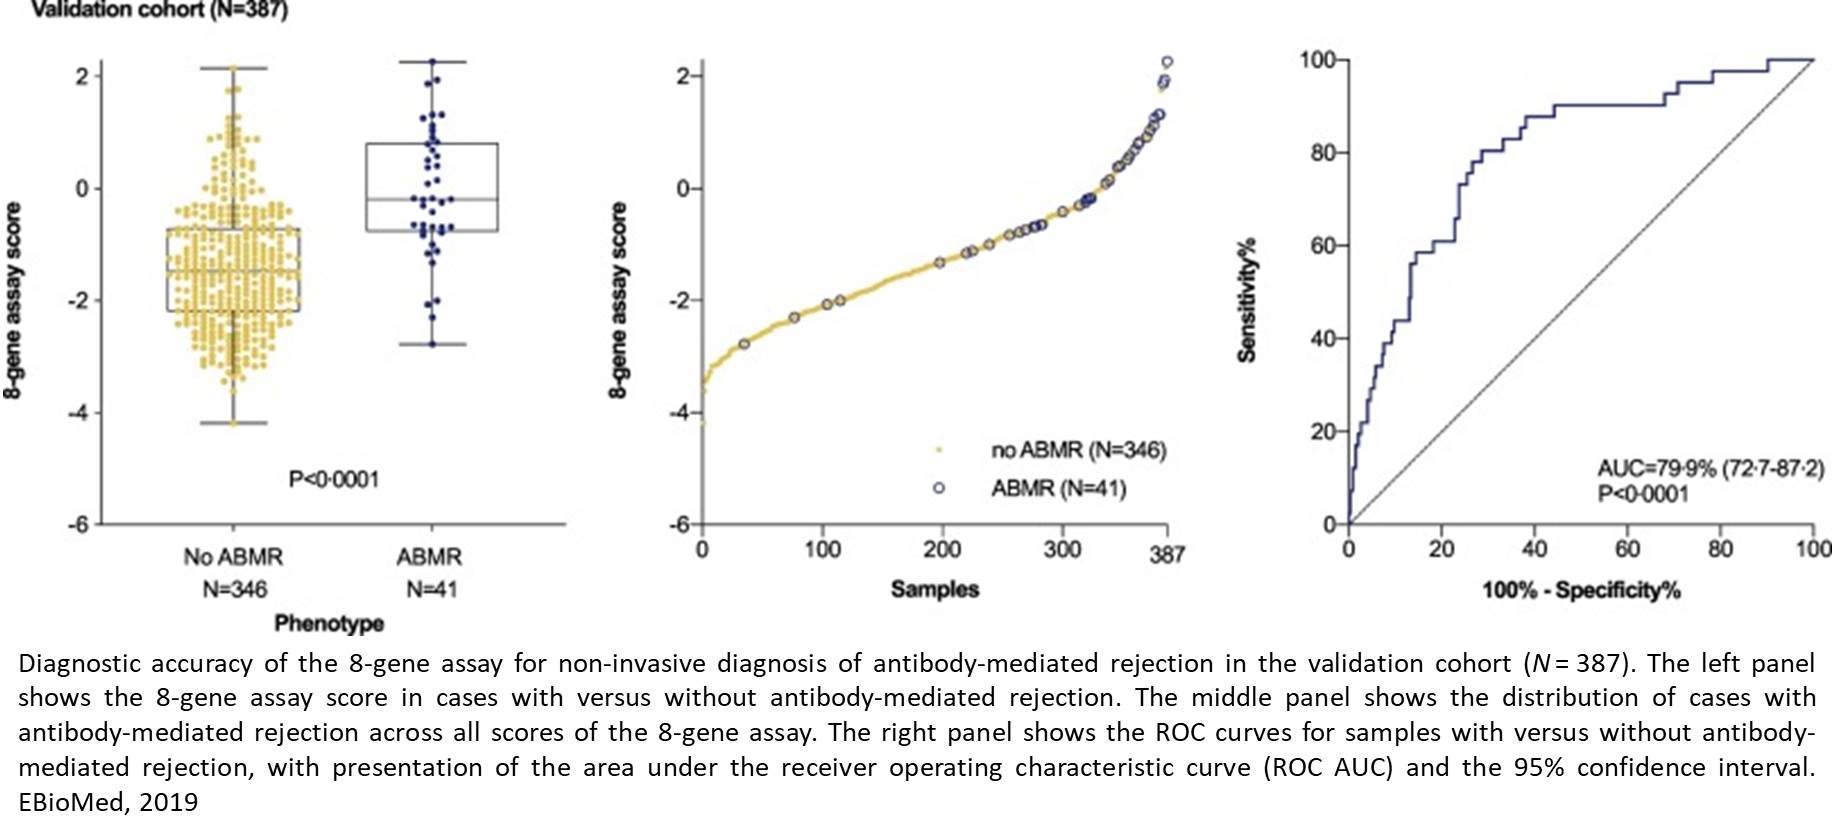 New blood mRNA assay to detect rejection by antibodies after kidney transplant